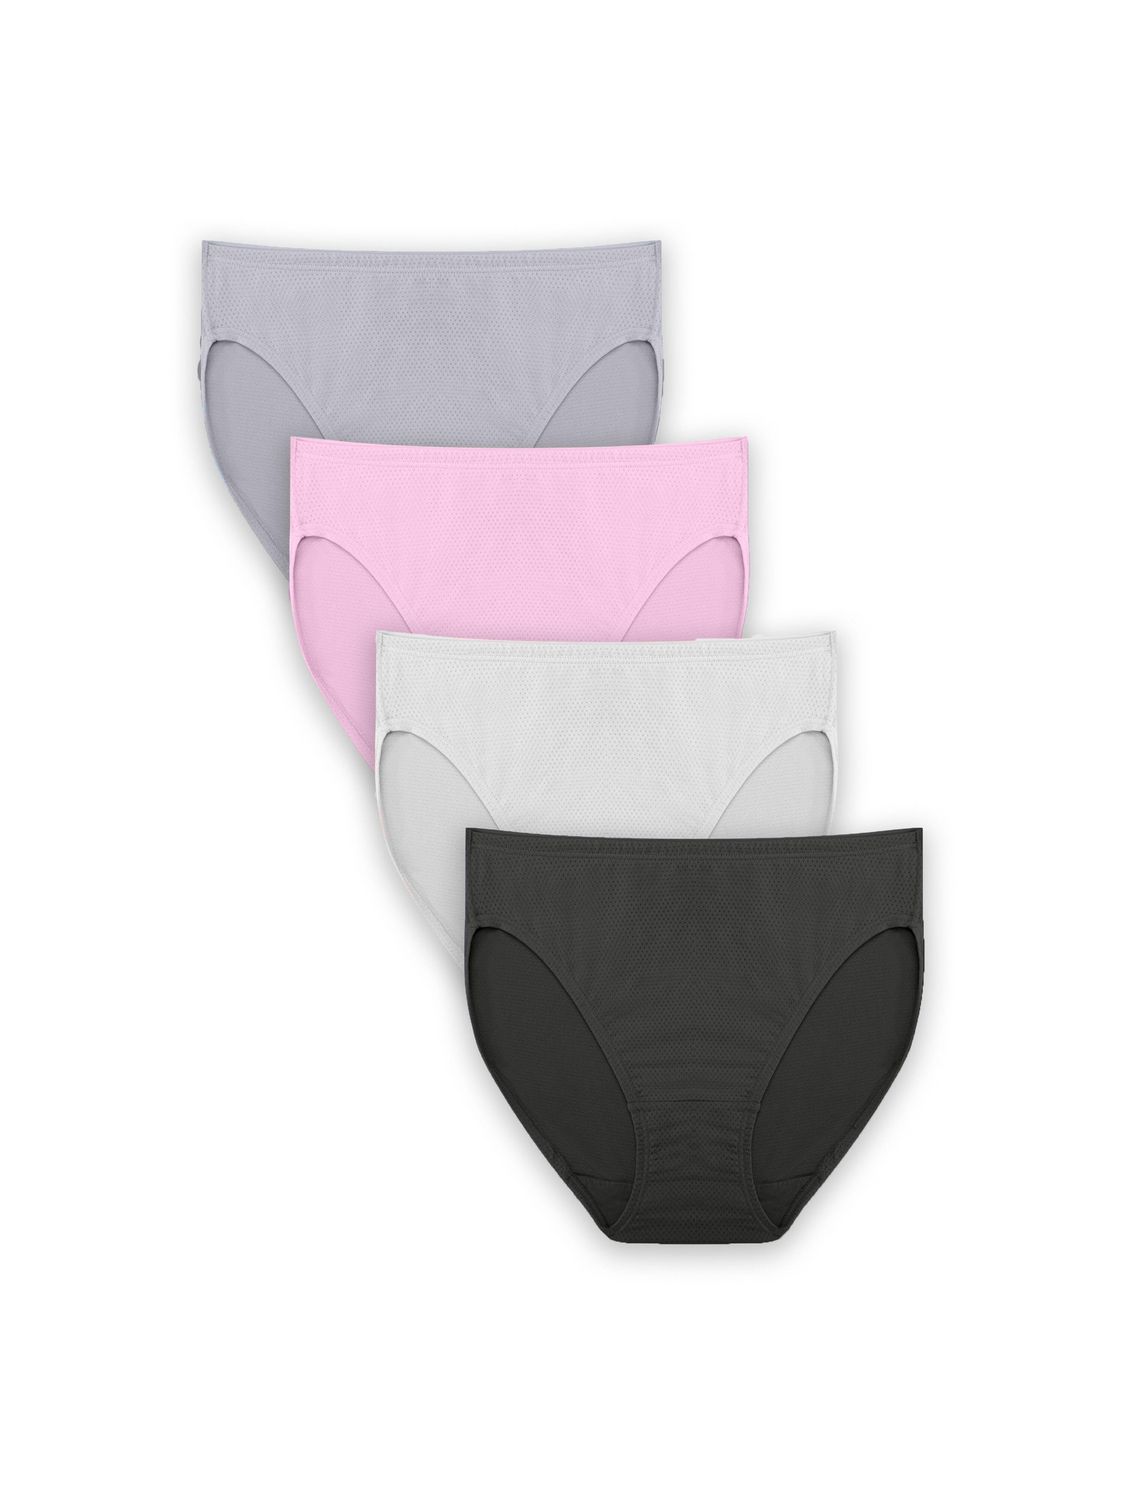 Just Be Women's Size 9 Assorted Briefs, 4 ct.